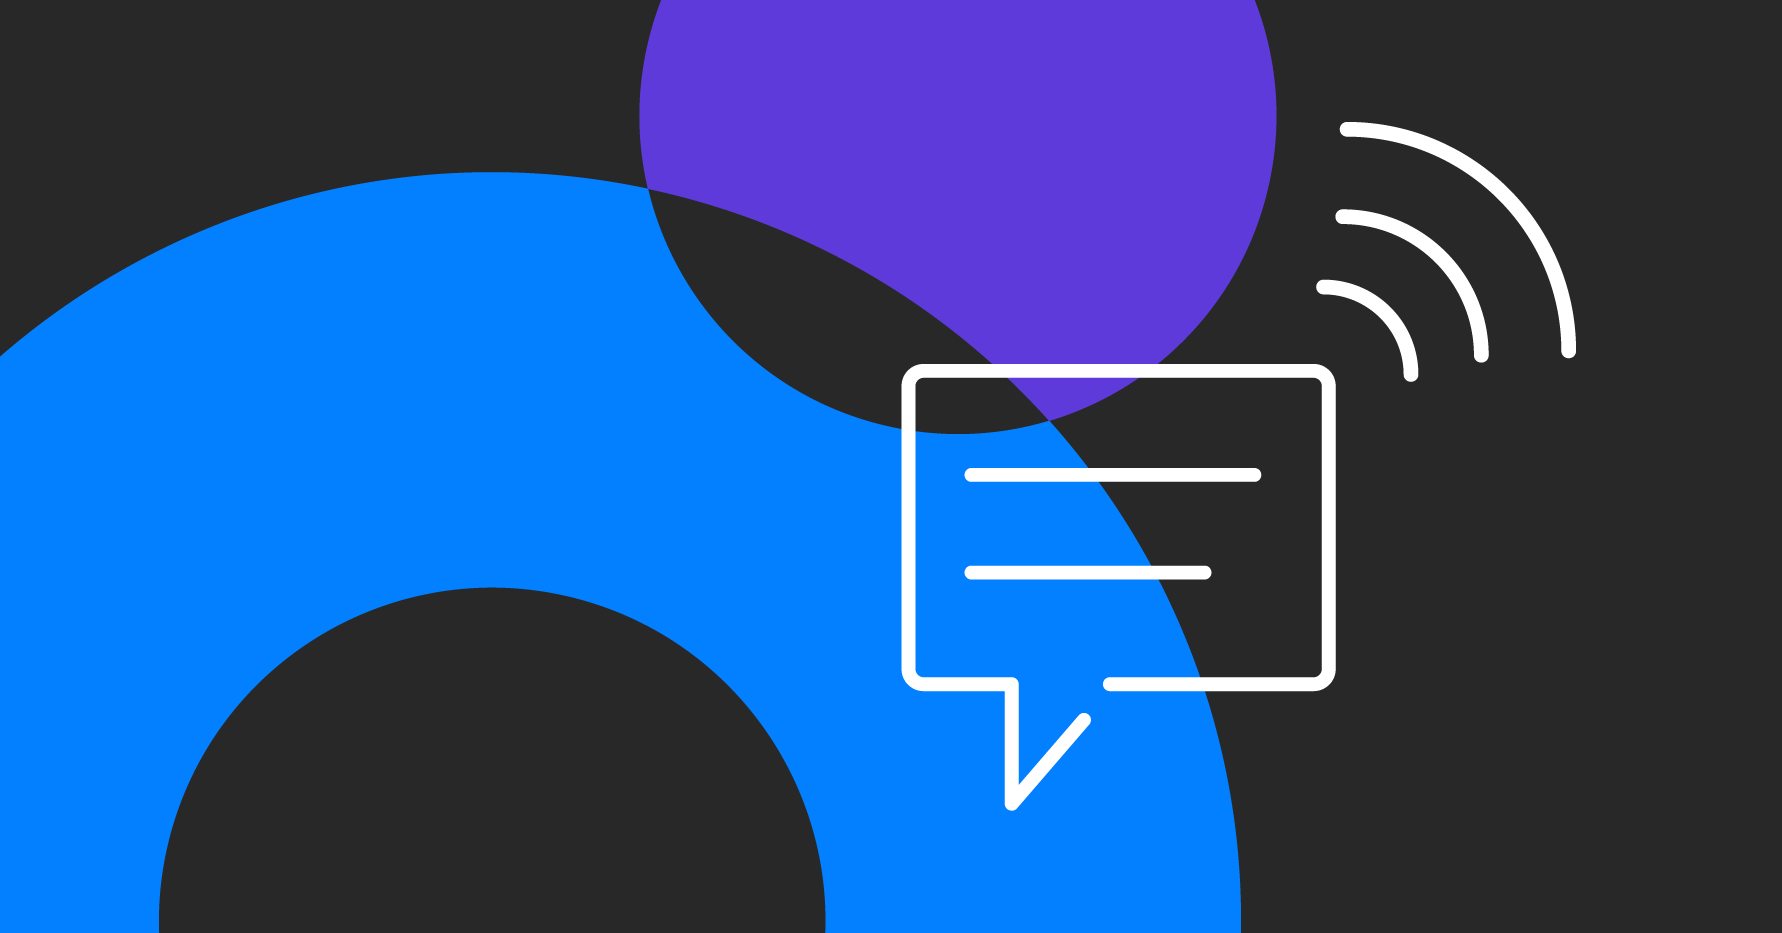 Stylized illustration of a chat message icon over overlapping circles